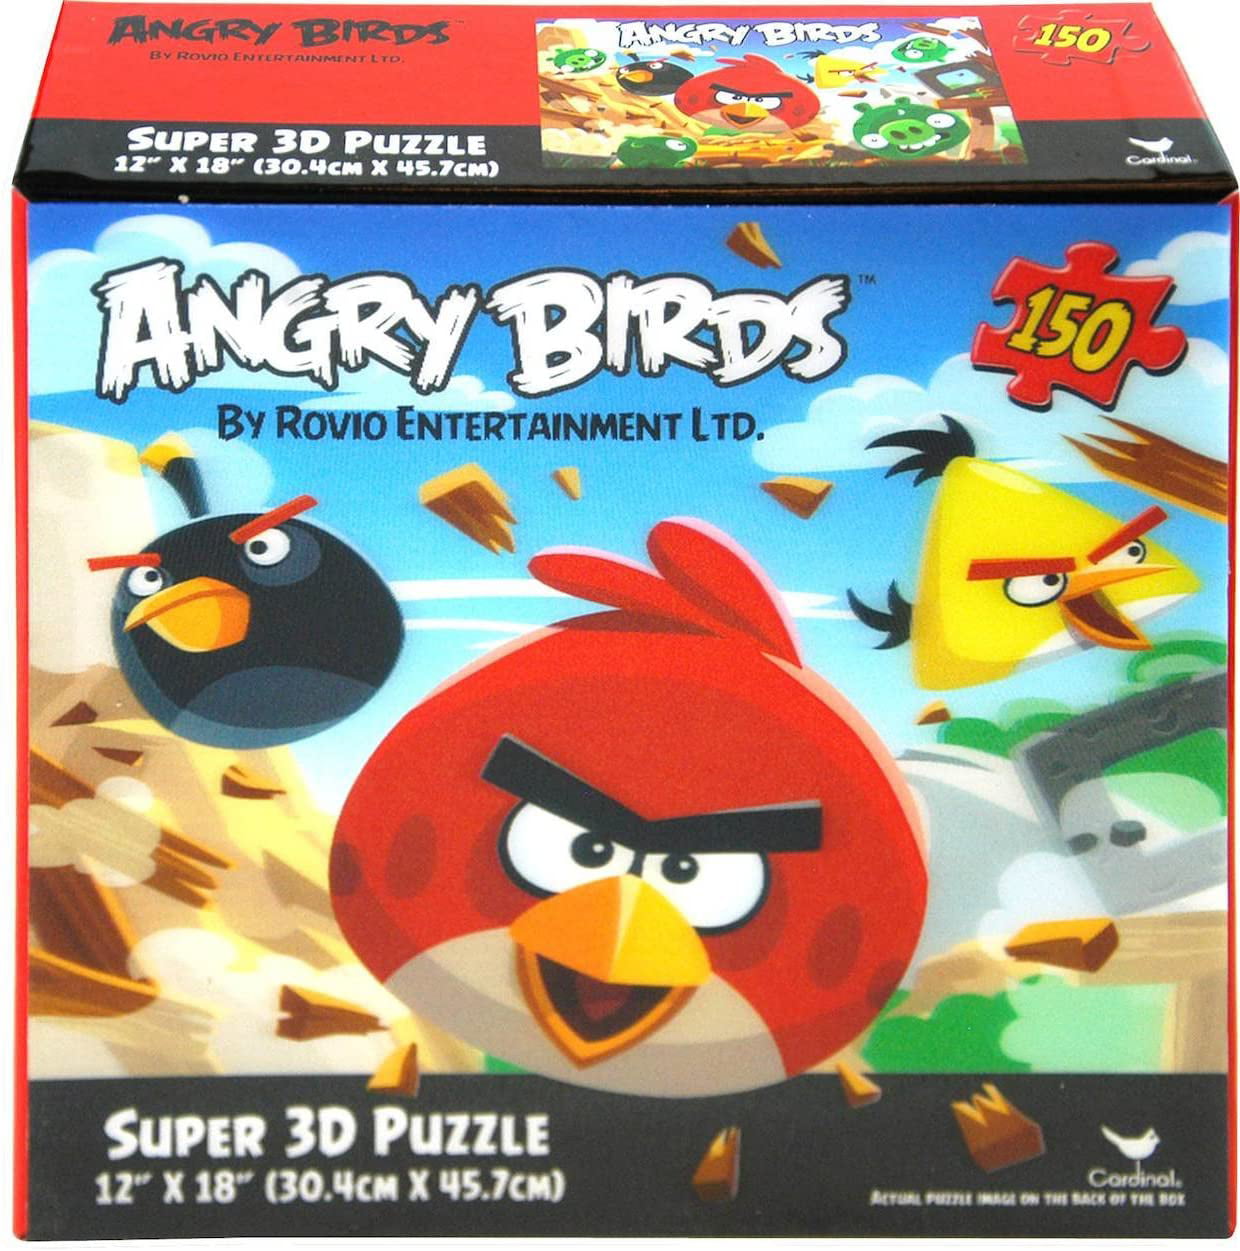 NEW IN BOX ANGRY BIRDS SUPER 3D PUZZLE 150 PIECES FACTORY SEALED 